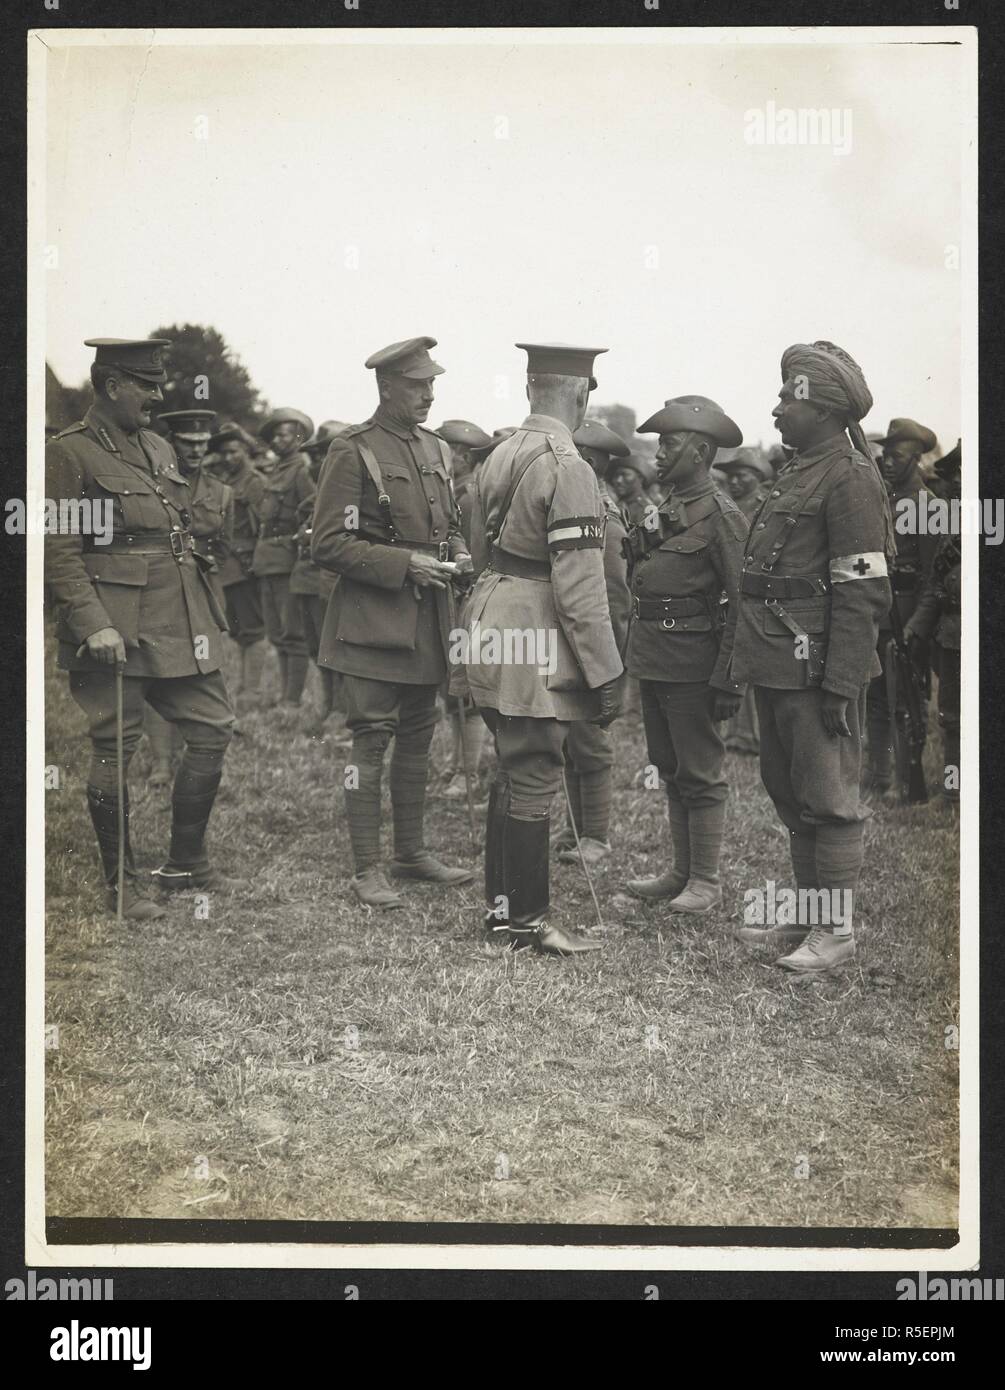 The General [Sir John Willcocks] talking to Indian officers at an inspection parade [Merville, France]. Other identified figures in the group are Brig-Gen. Blackader and Col. Anderson, 29th July 1915. Record of the Indian Army in Europe during the First World War. 20th century, 29th July 1915. Gelatin silver prints. Source: Photo 24/(166). Author: Girdwood, H. D. Stock Photo